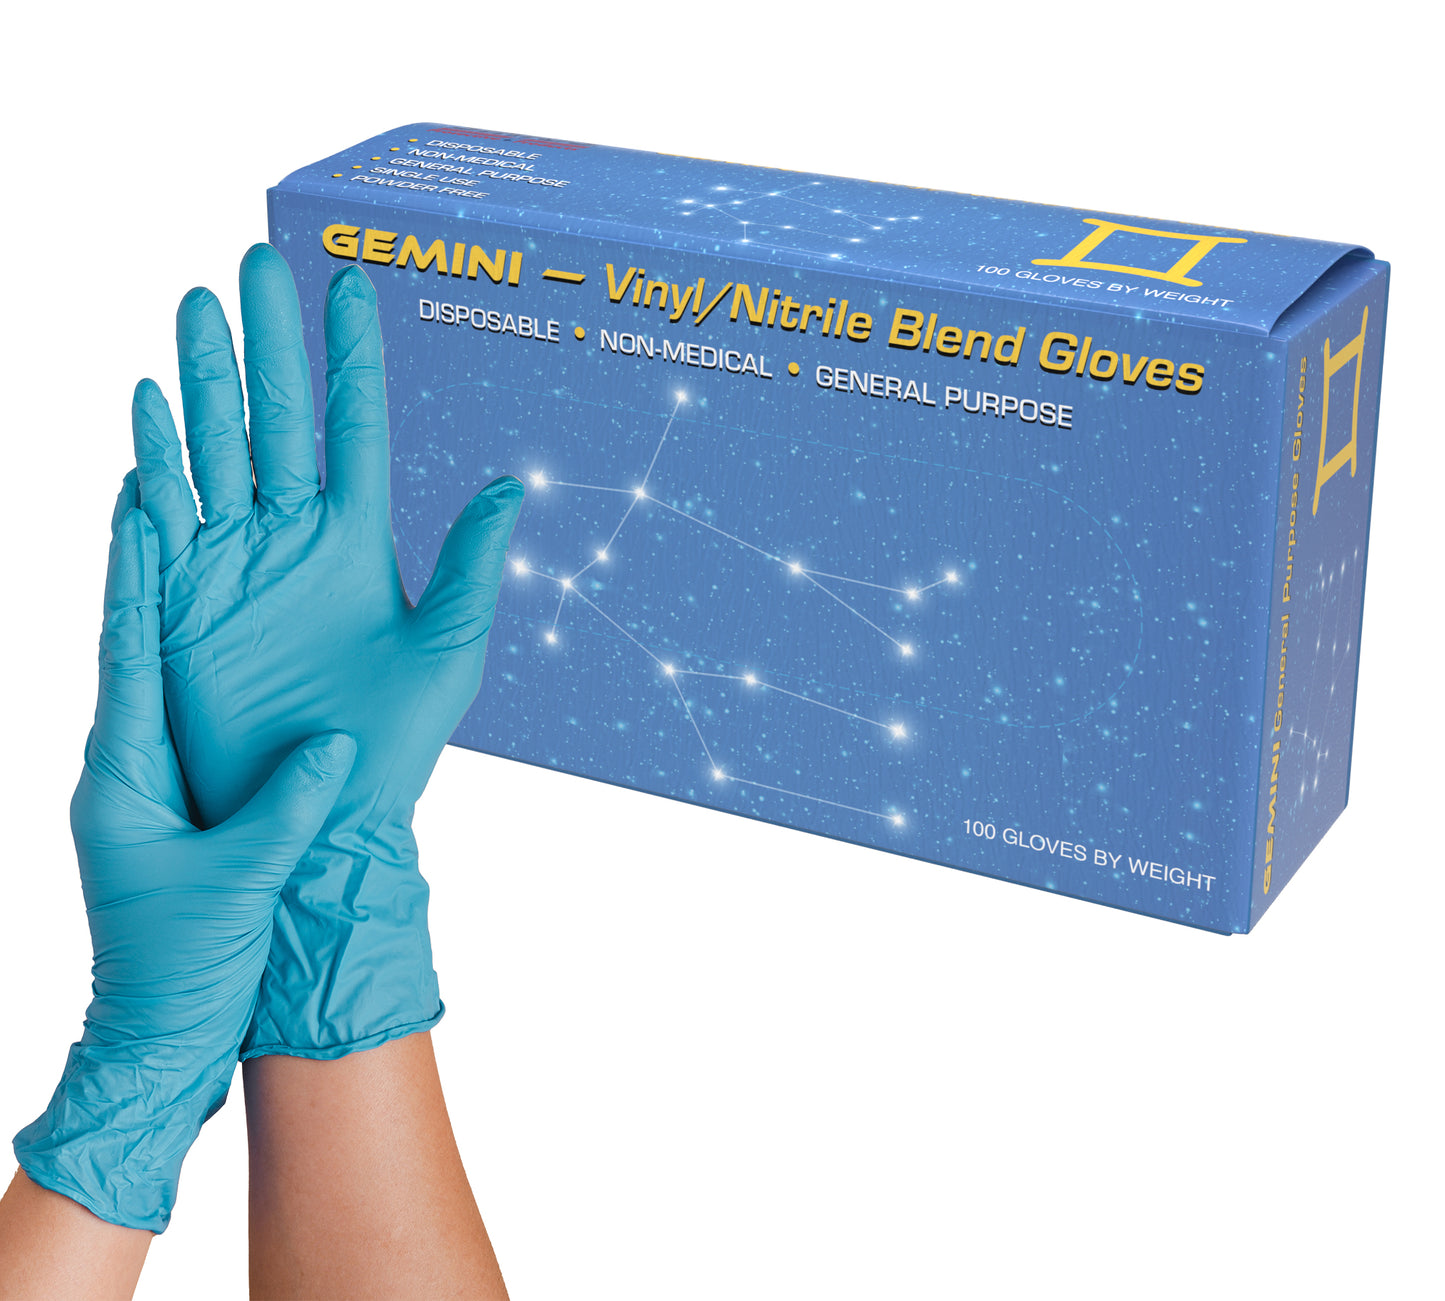 Gemini - Disposable All Purpose Gloves, Blue Synthetic Gloves, Latex Free, Powder Free